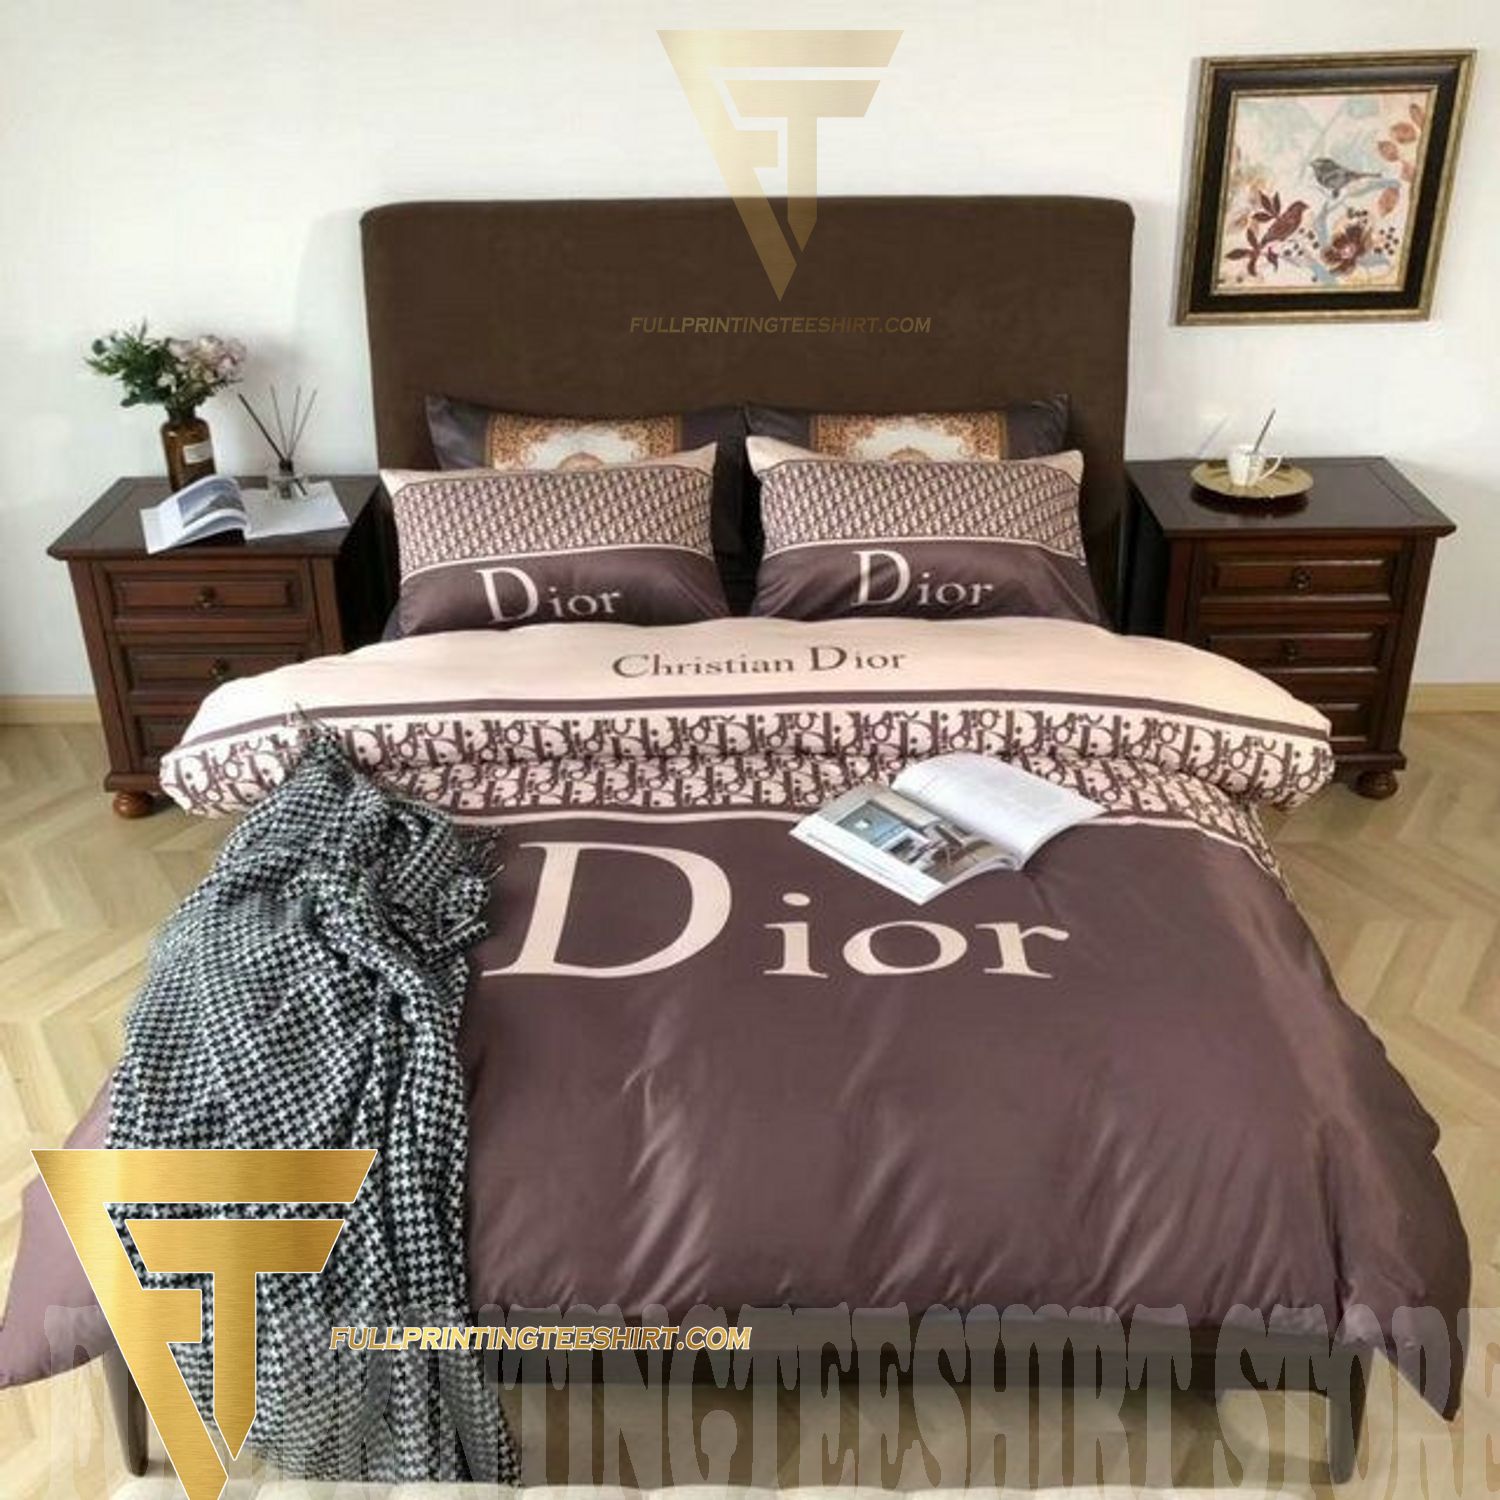 Top-selling item] Luxury Christian Dior Brand Type 38 Bedding Sets